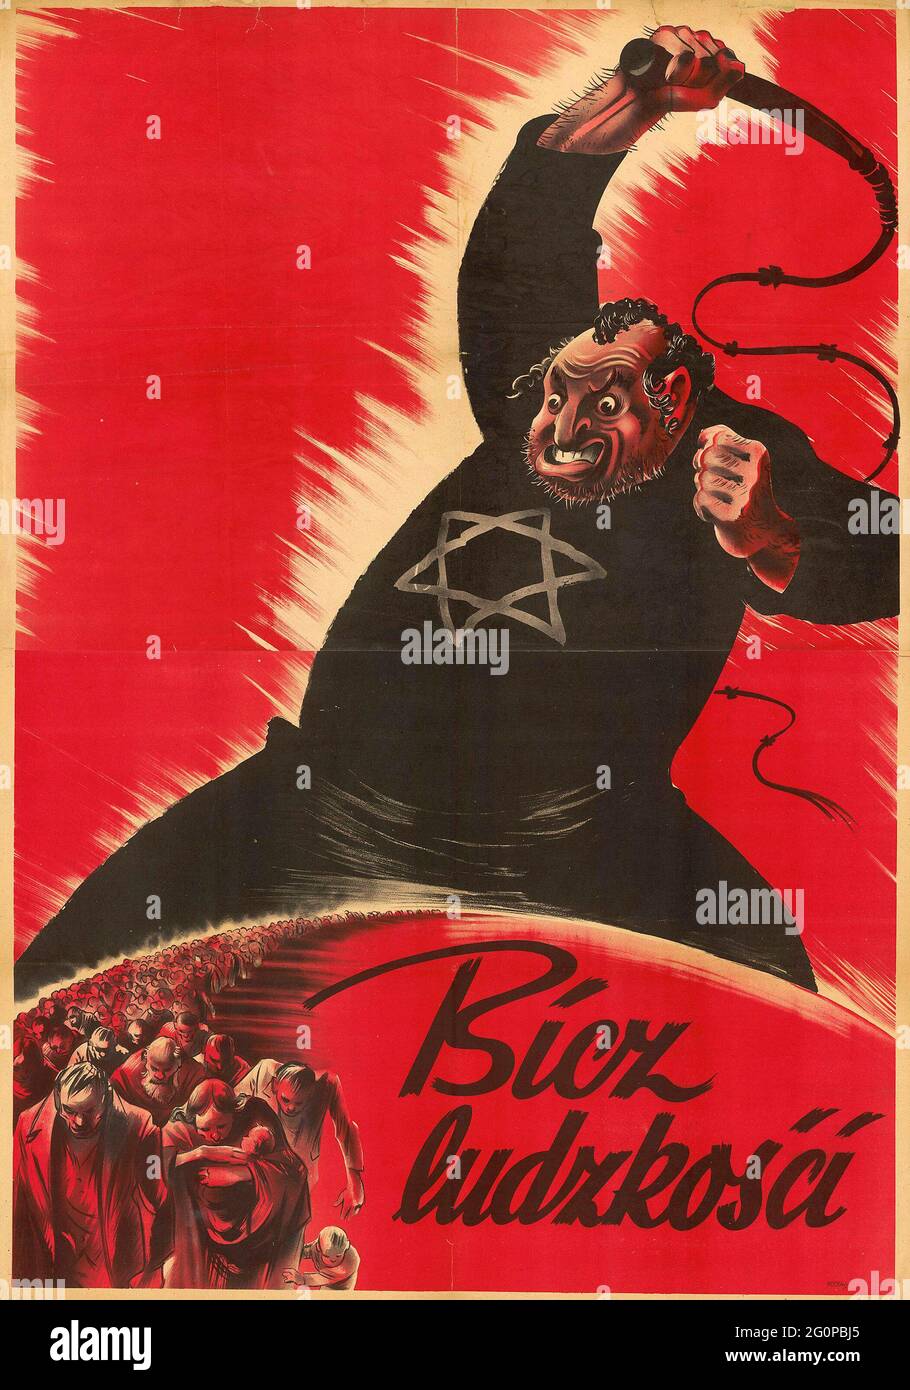 a-vintage-nazi-propaganda-poster-from-occupied-poland-showing-a-bestial-jew-whipping-fleeing-people-with-the-slogan-the-whip-of-humanity-2G0PBJ5.jpg